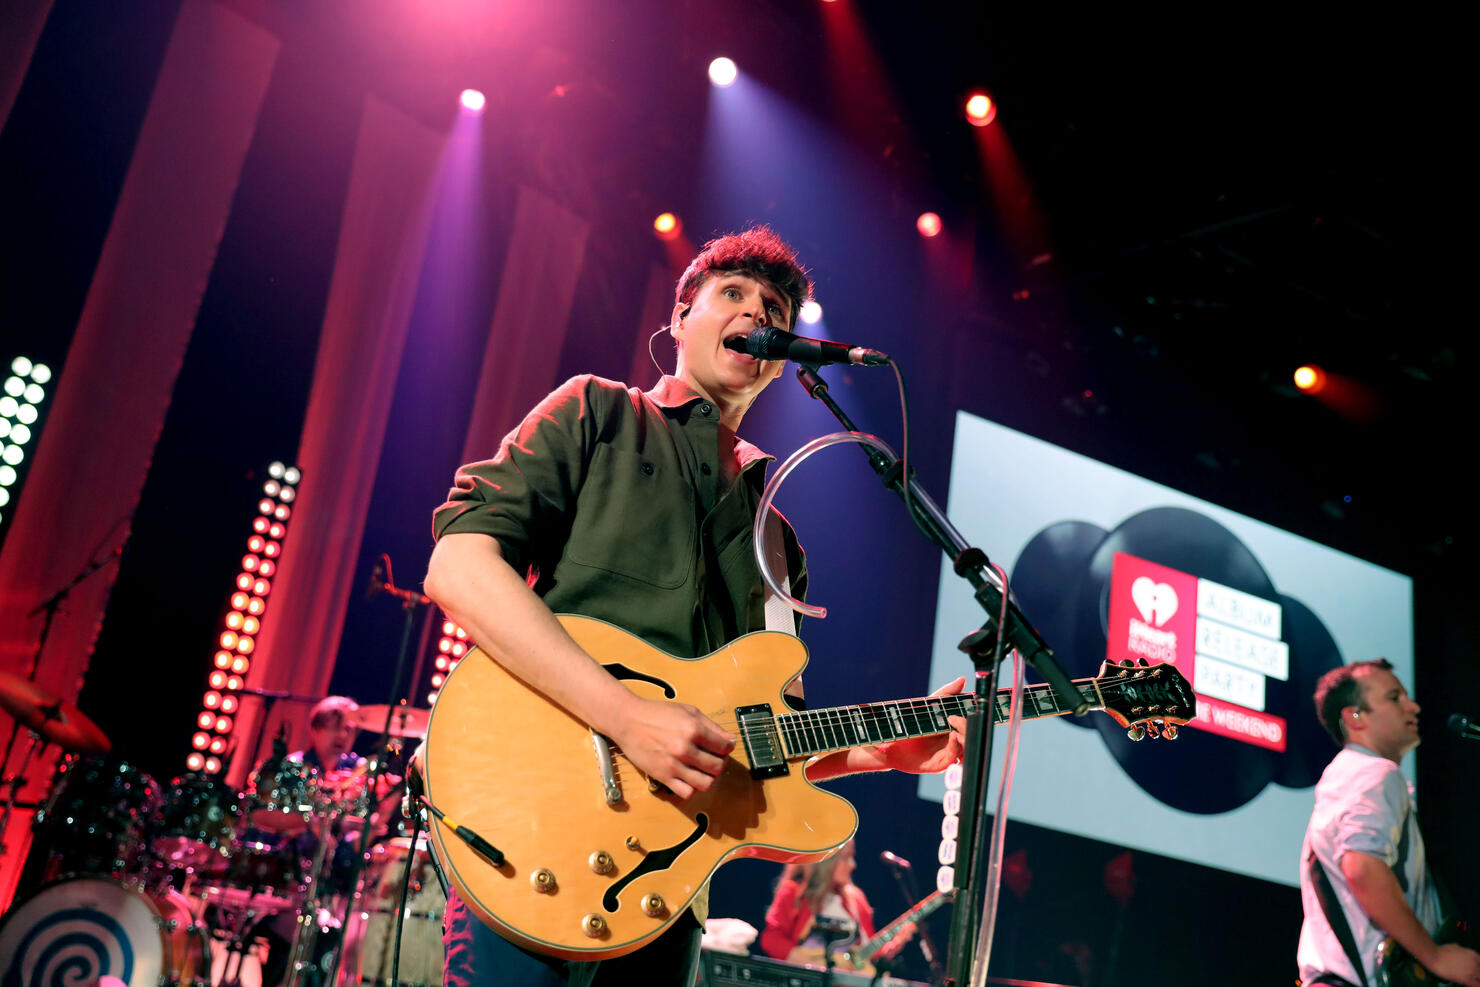 iHeartRadio Album Release Party With Vampire Weekend At The iHeartRadio Theater LA